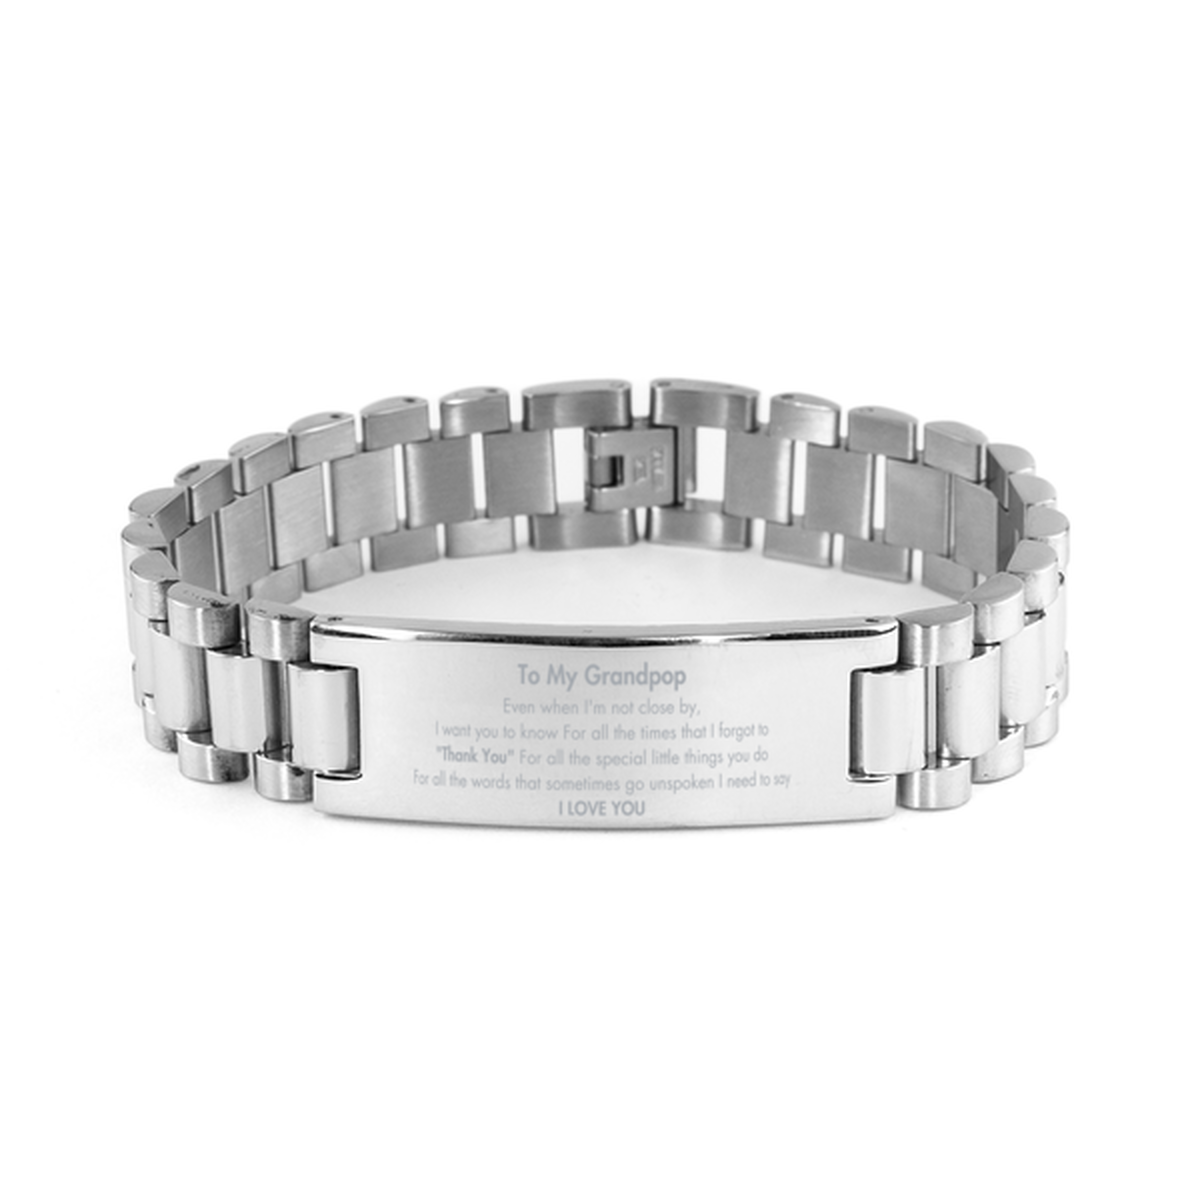 Thank You Gifts for Grandpop, Keepsake Ladder Stainless Steel Bracelet Gifts for Grandpop Birthday Mother's day Father's Day Grandpop For all the words That sometimes go unspoken I need to say I LOVE YOU